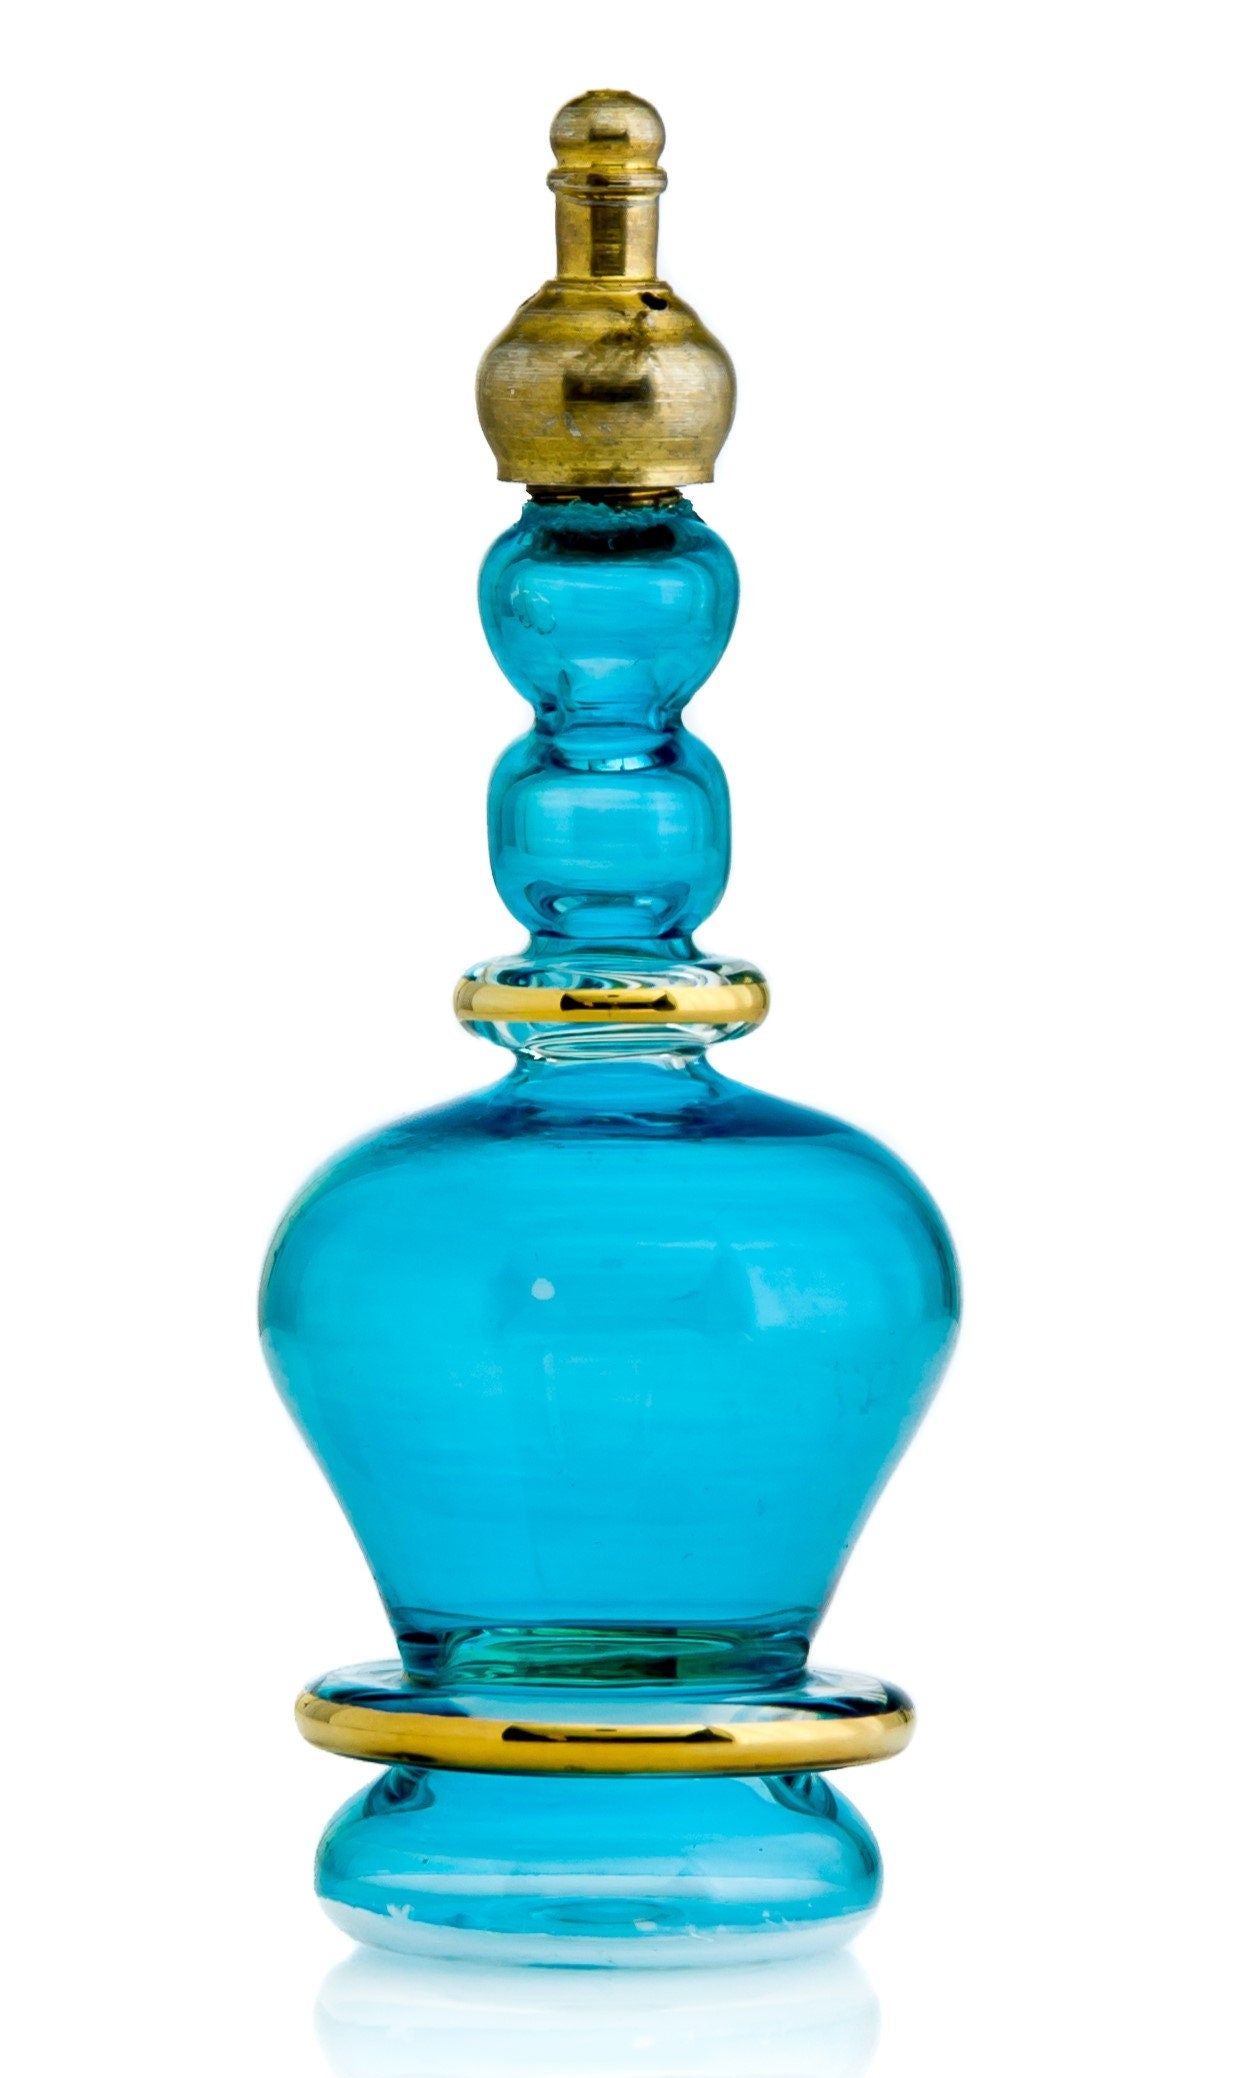 Turquoise Decorative Perfume Bottle with Copper Stopper - Les Trois Pyramides